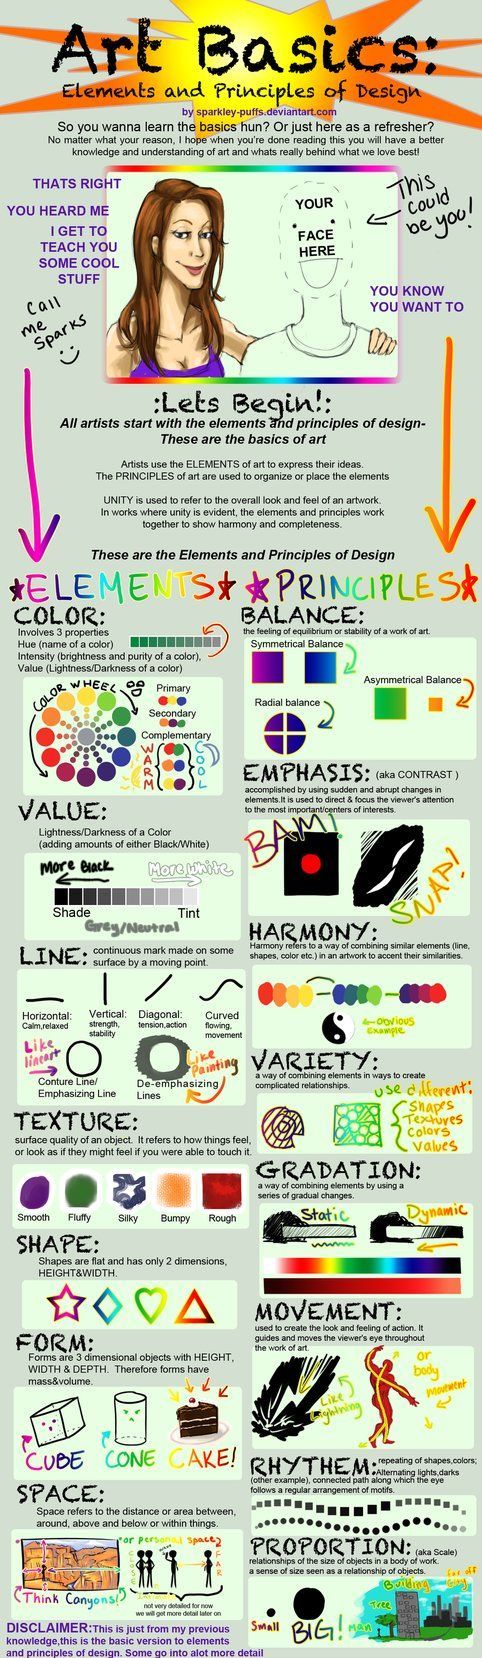 Elements+Principles of Design by *TheCuddlyKoalaWhale on deviantART